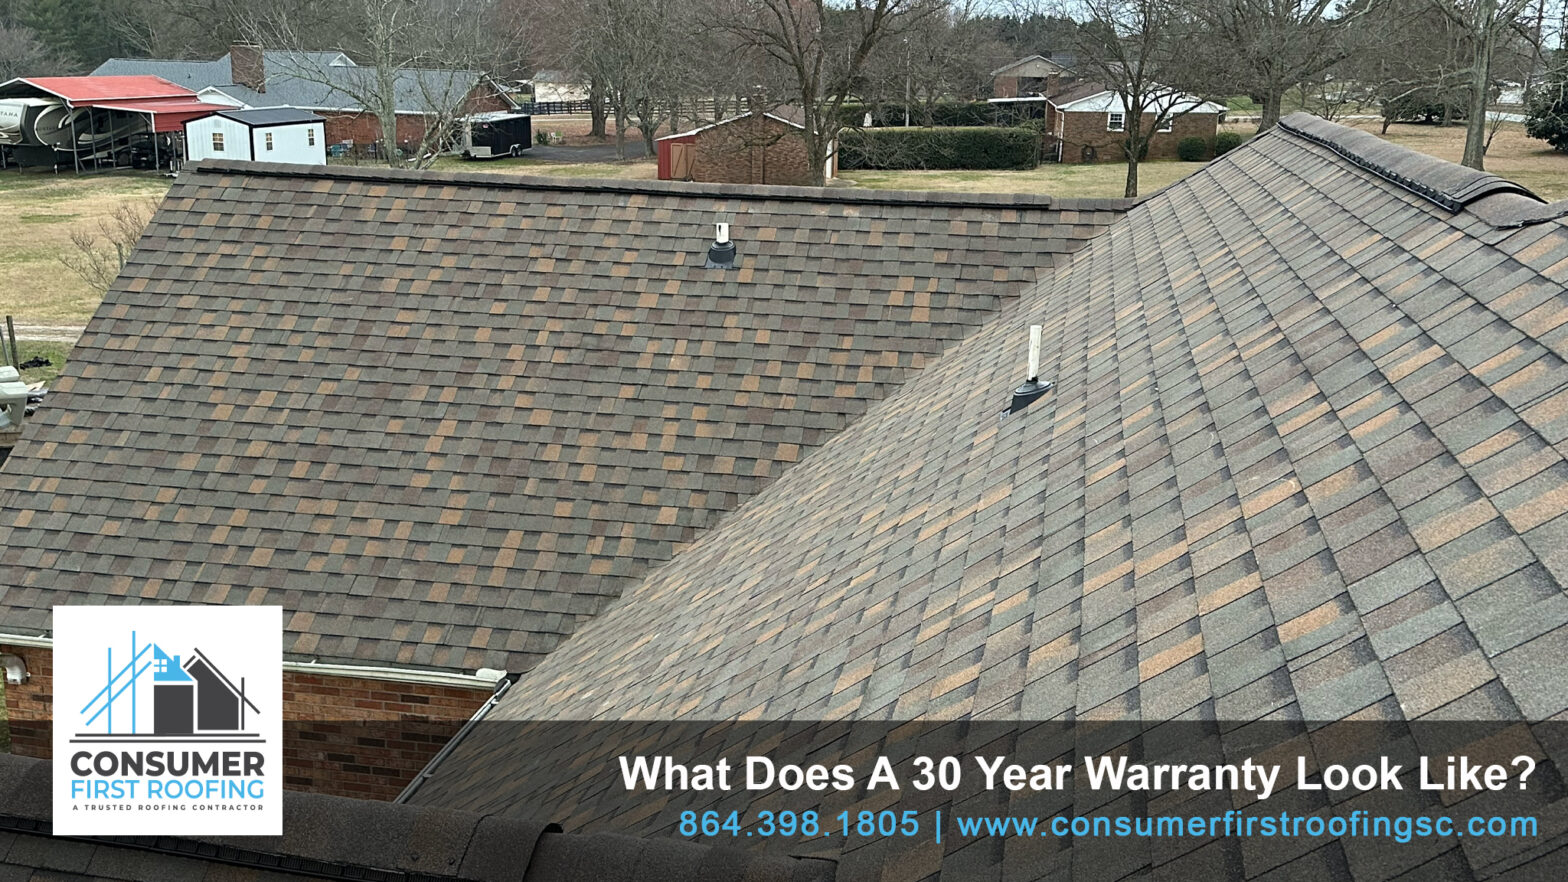 Roof Warranty | Consumer First Roofing